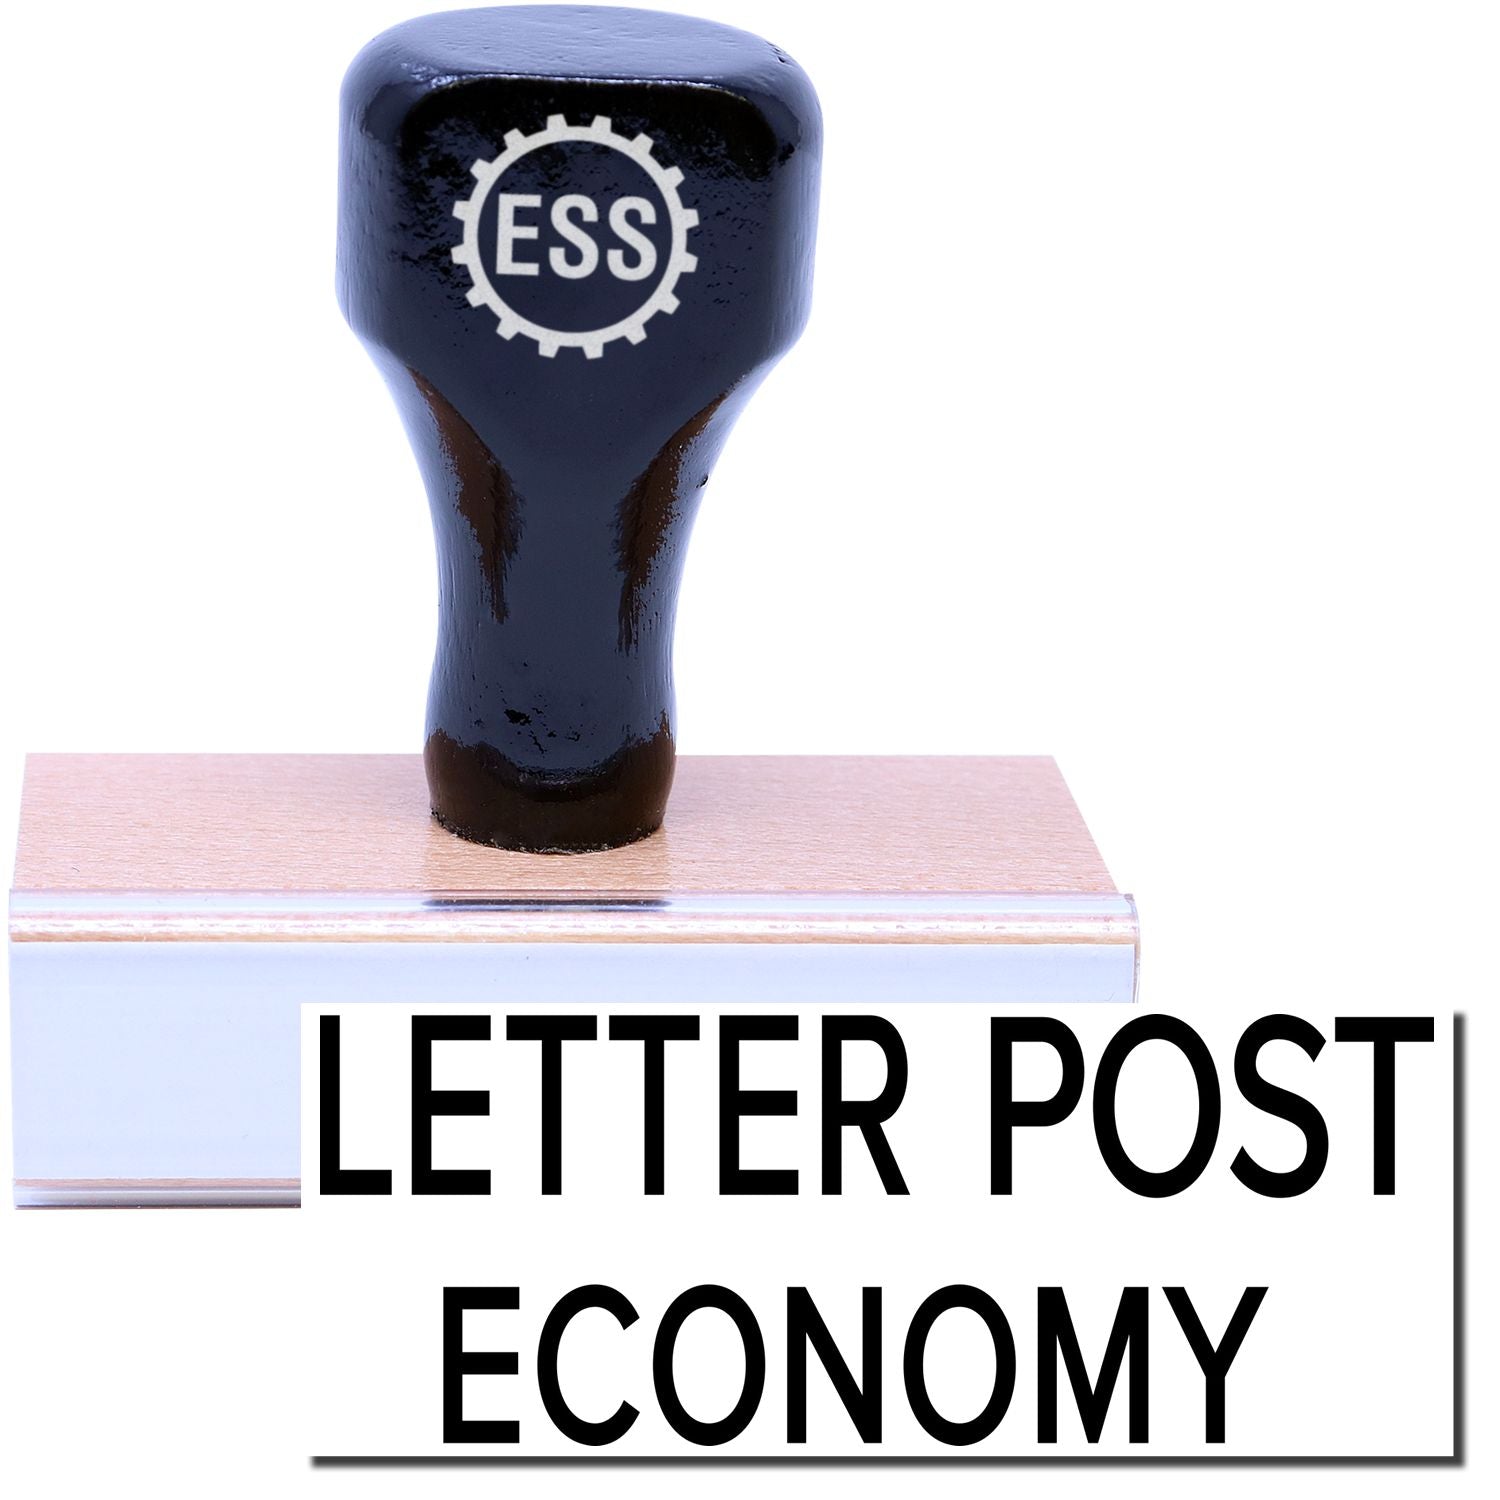 A stock office rubber stamp with a stamped image showing how the text "LETTER POST ECONOMY" is displayed after stamping.